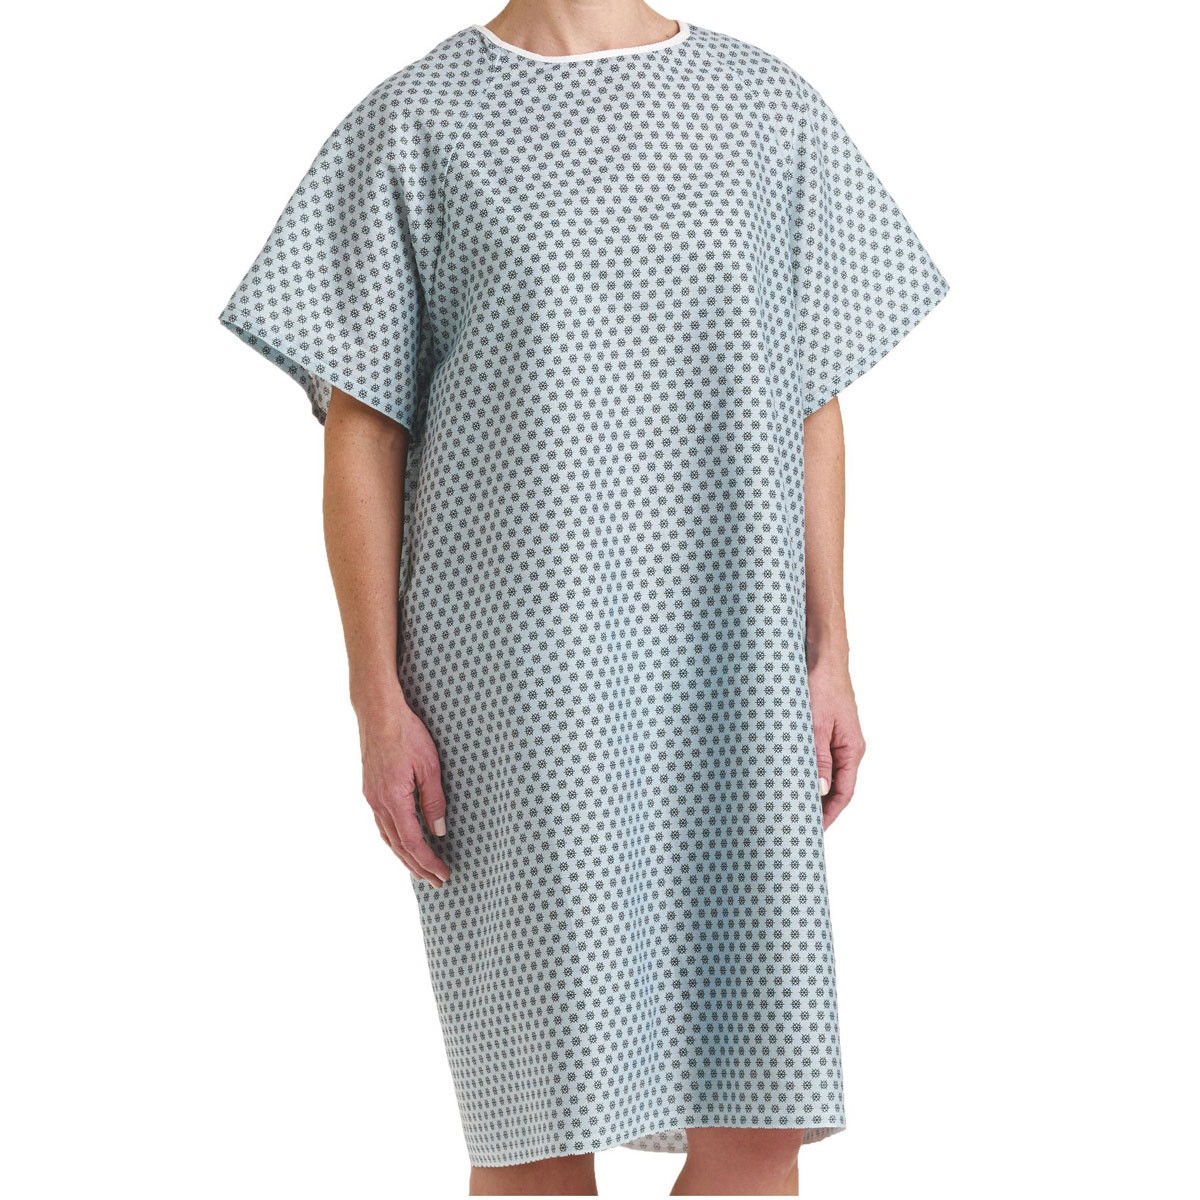 Where can I locate a hospital gown with thicker fabric, similar to this Traditional Patient Gown?